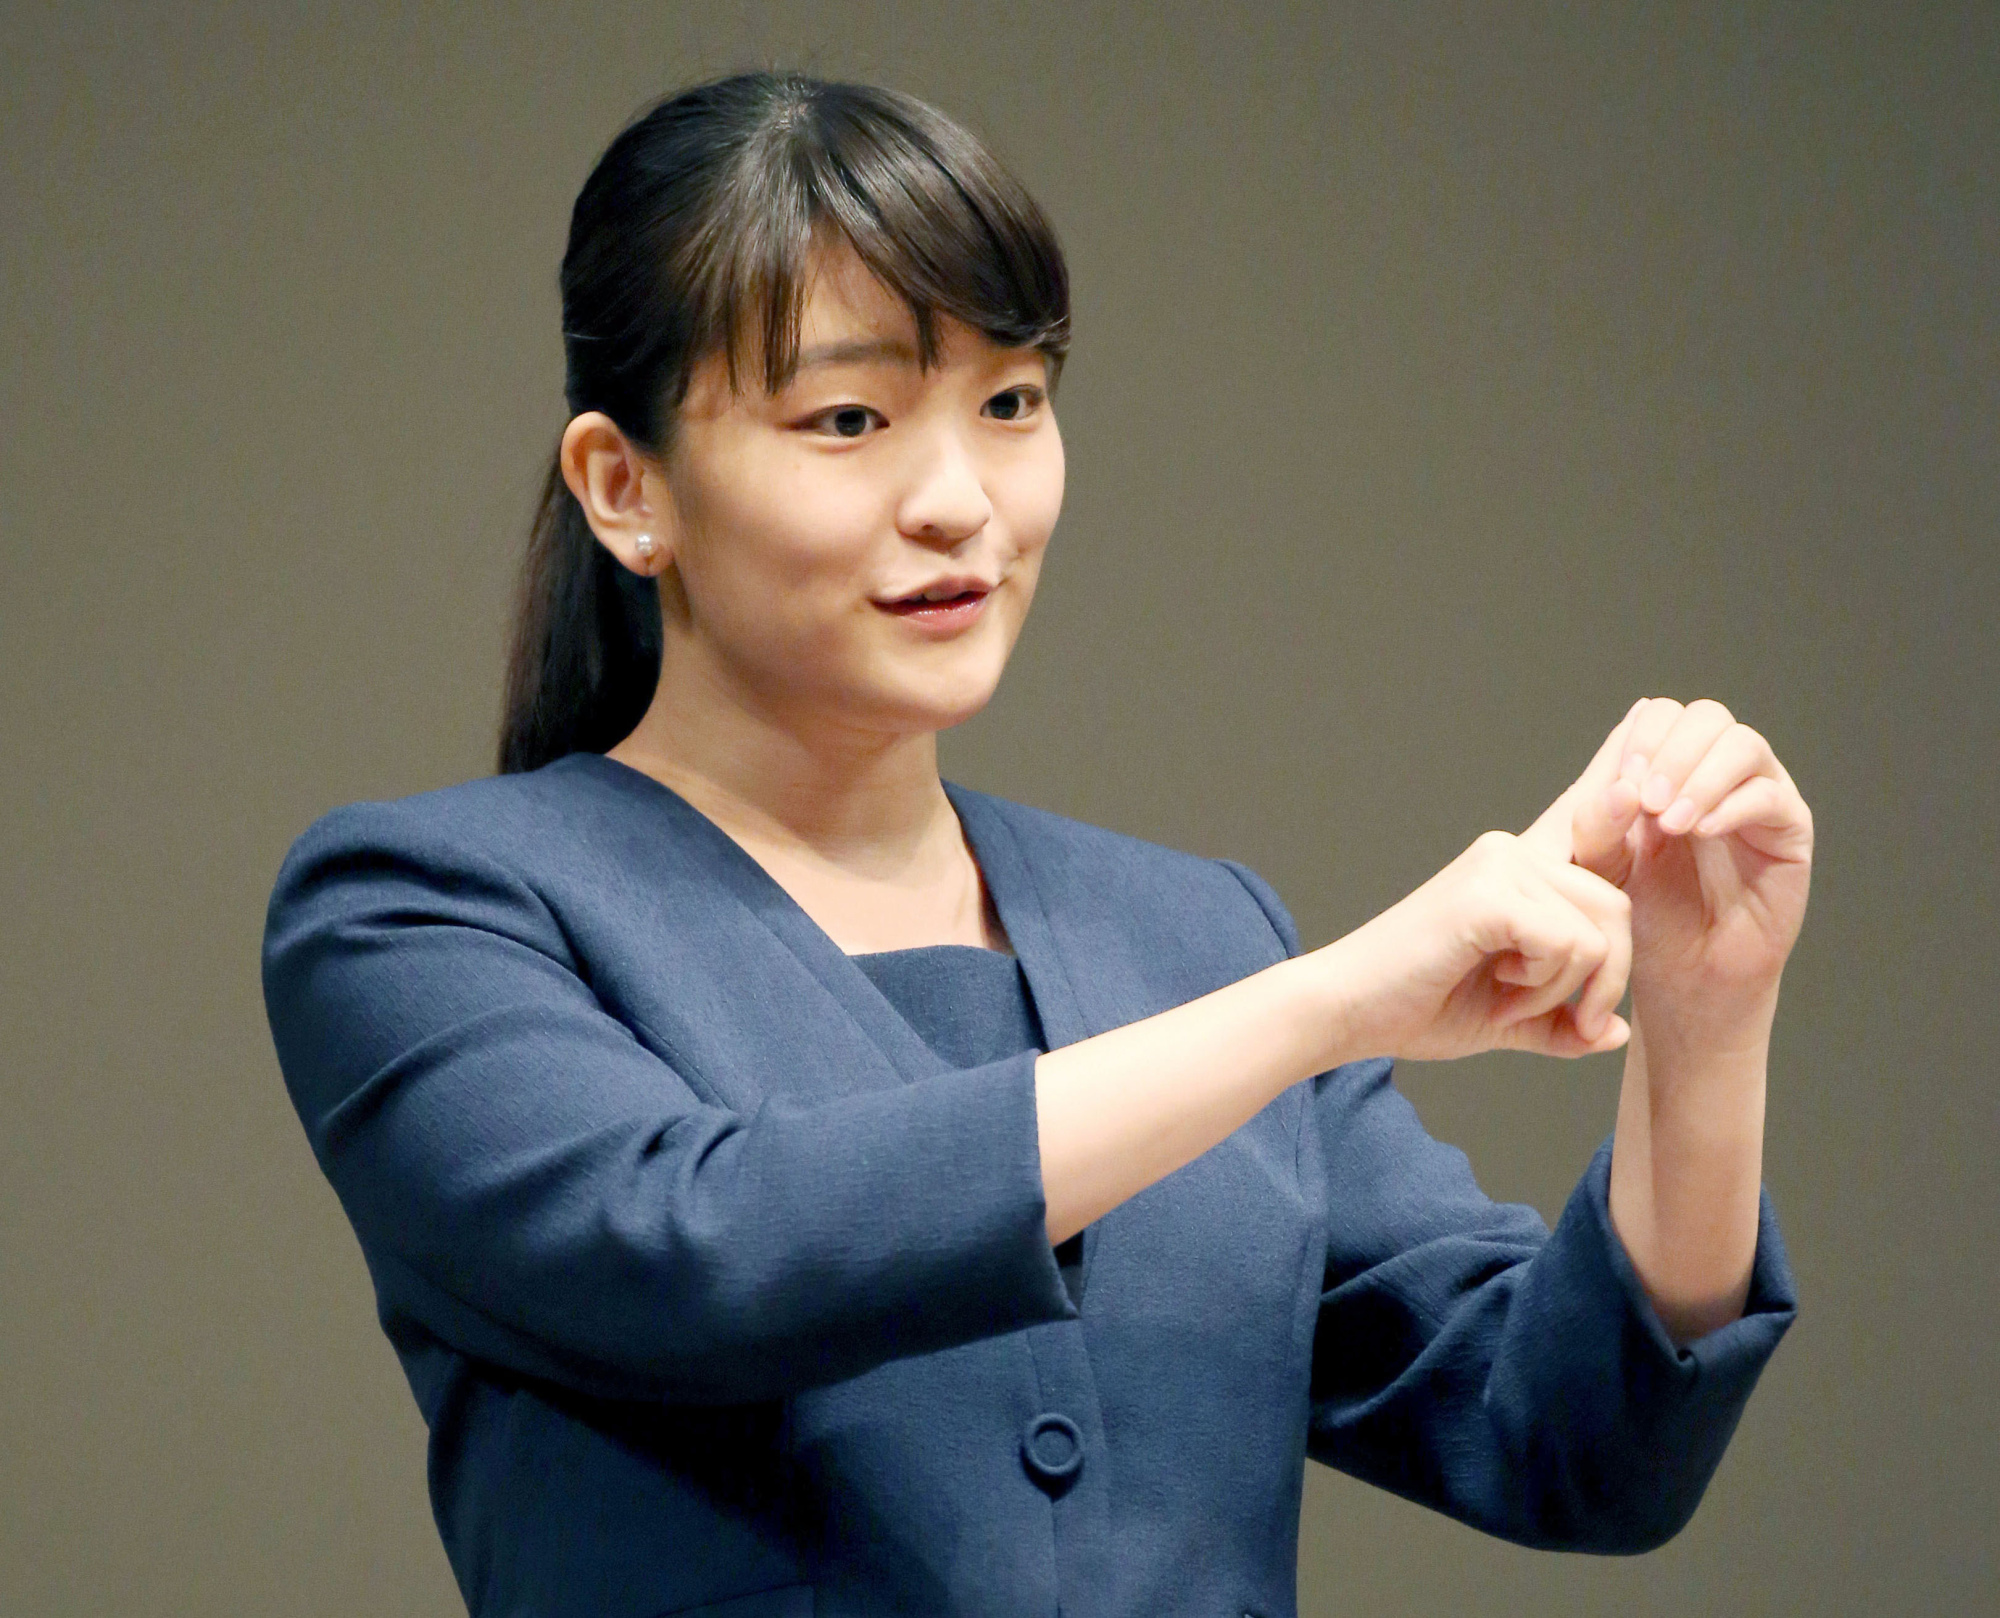 Princess Mako, the 25-year-old daughter of Prince Akishino and Princess Kiko, is set to be engaged to a former classmate from International Christian University, NHK reported. | POOL / VIA KYODO